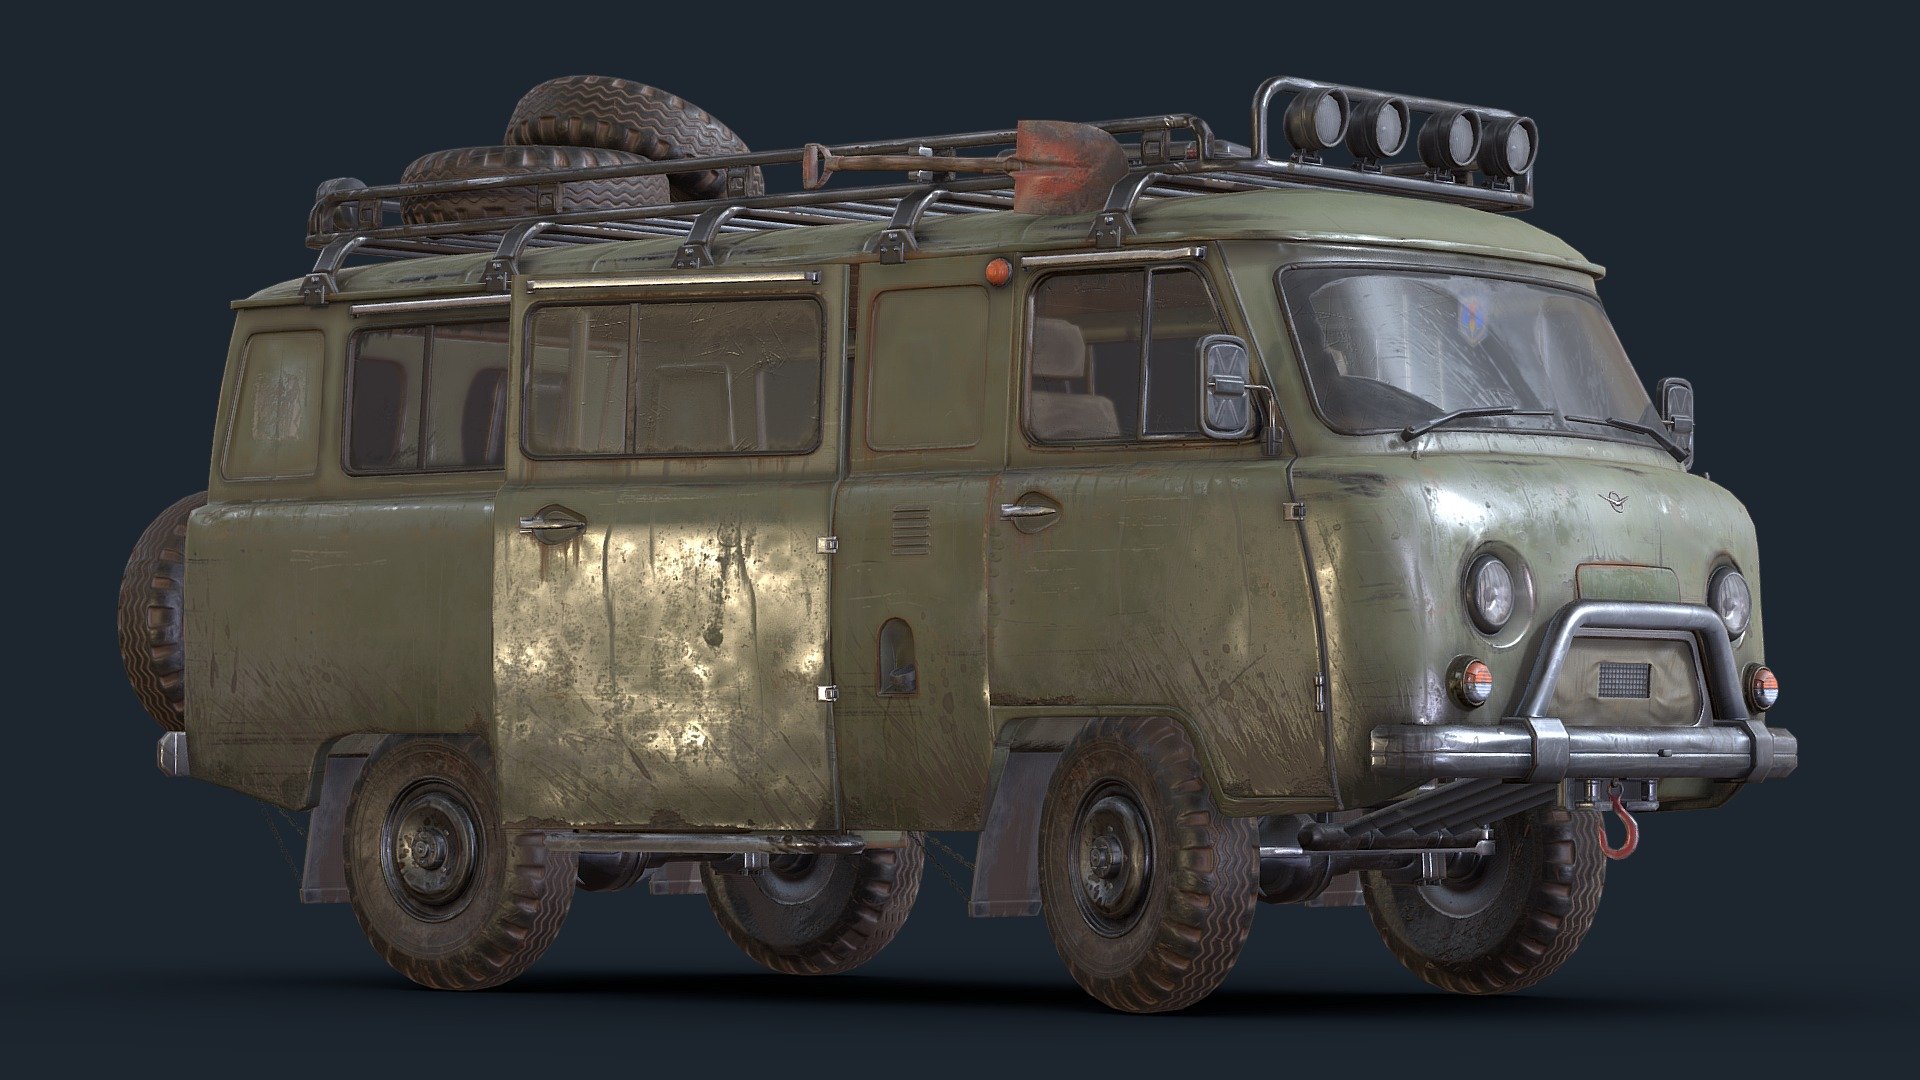 One day I was walking down the street and saw a rusty bukhanka. There was a great desire to model it, which I did. it took about a month to work in my free time

4 sets 4k. 51,159 triangles
Modeling was done in Blender, baking in Marmoset Toolbag, texturing in Substance Painter.

You can find renders at my Artstation https://www.artstation.com/artwork/XggZxL
 - UAZ Bukhanka - 3D model by Valery Kharitonov (@KJLOYH) 3d model